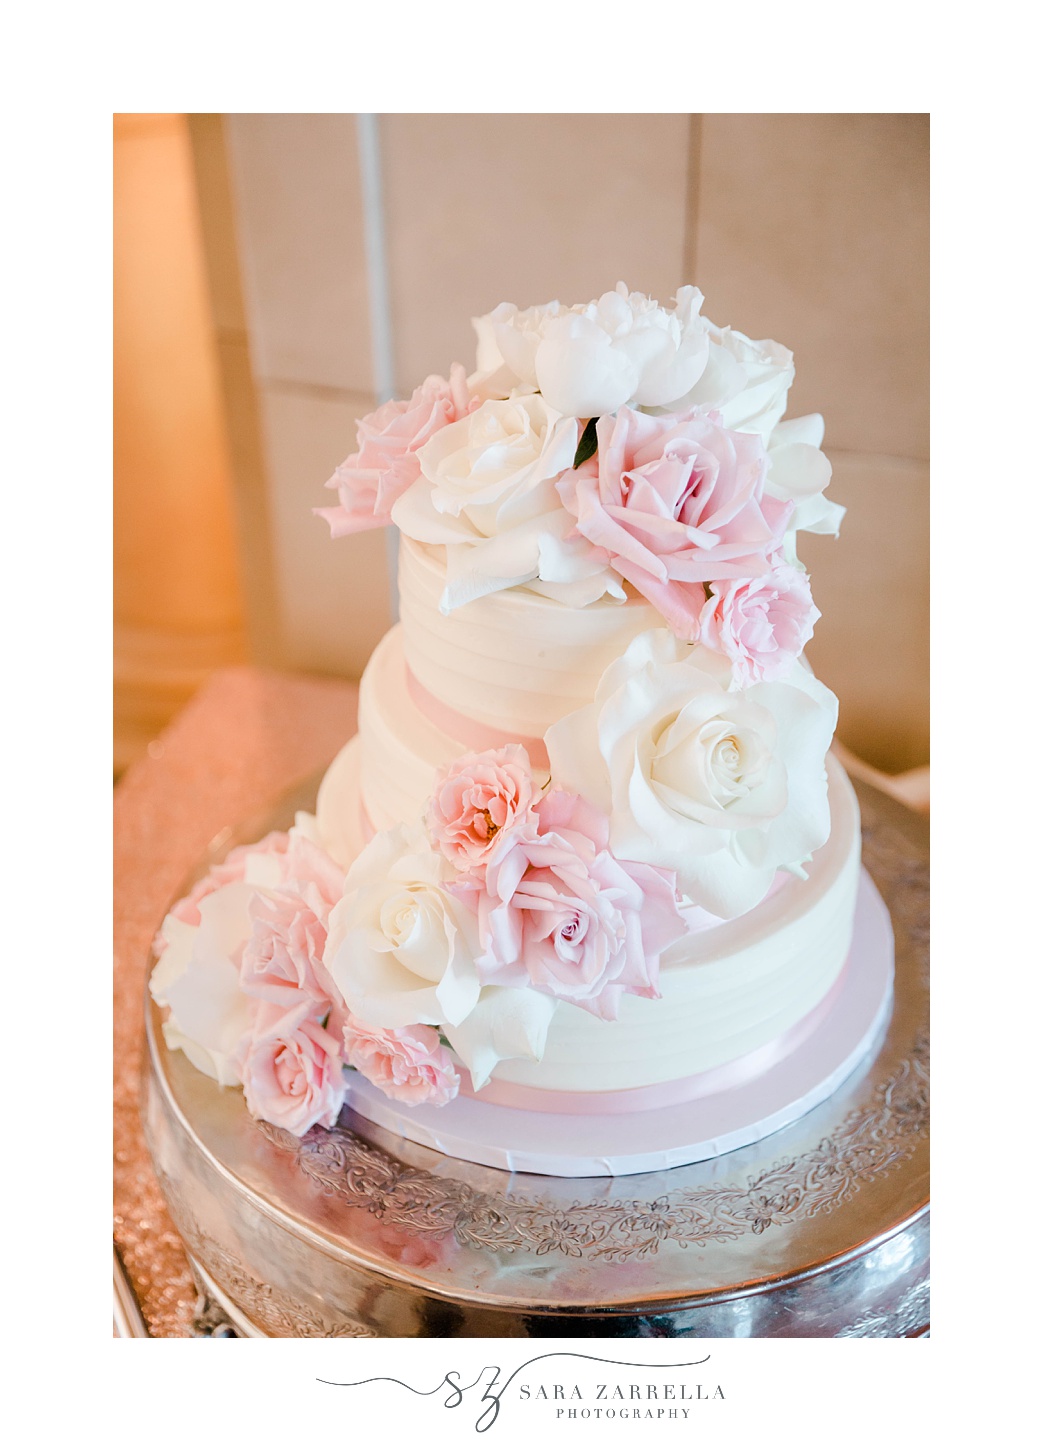 tiered wedding cake with pink and ivory flowers